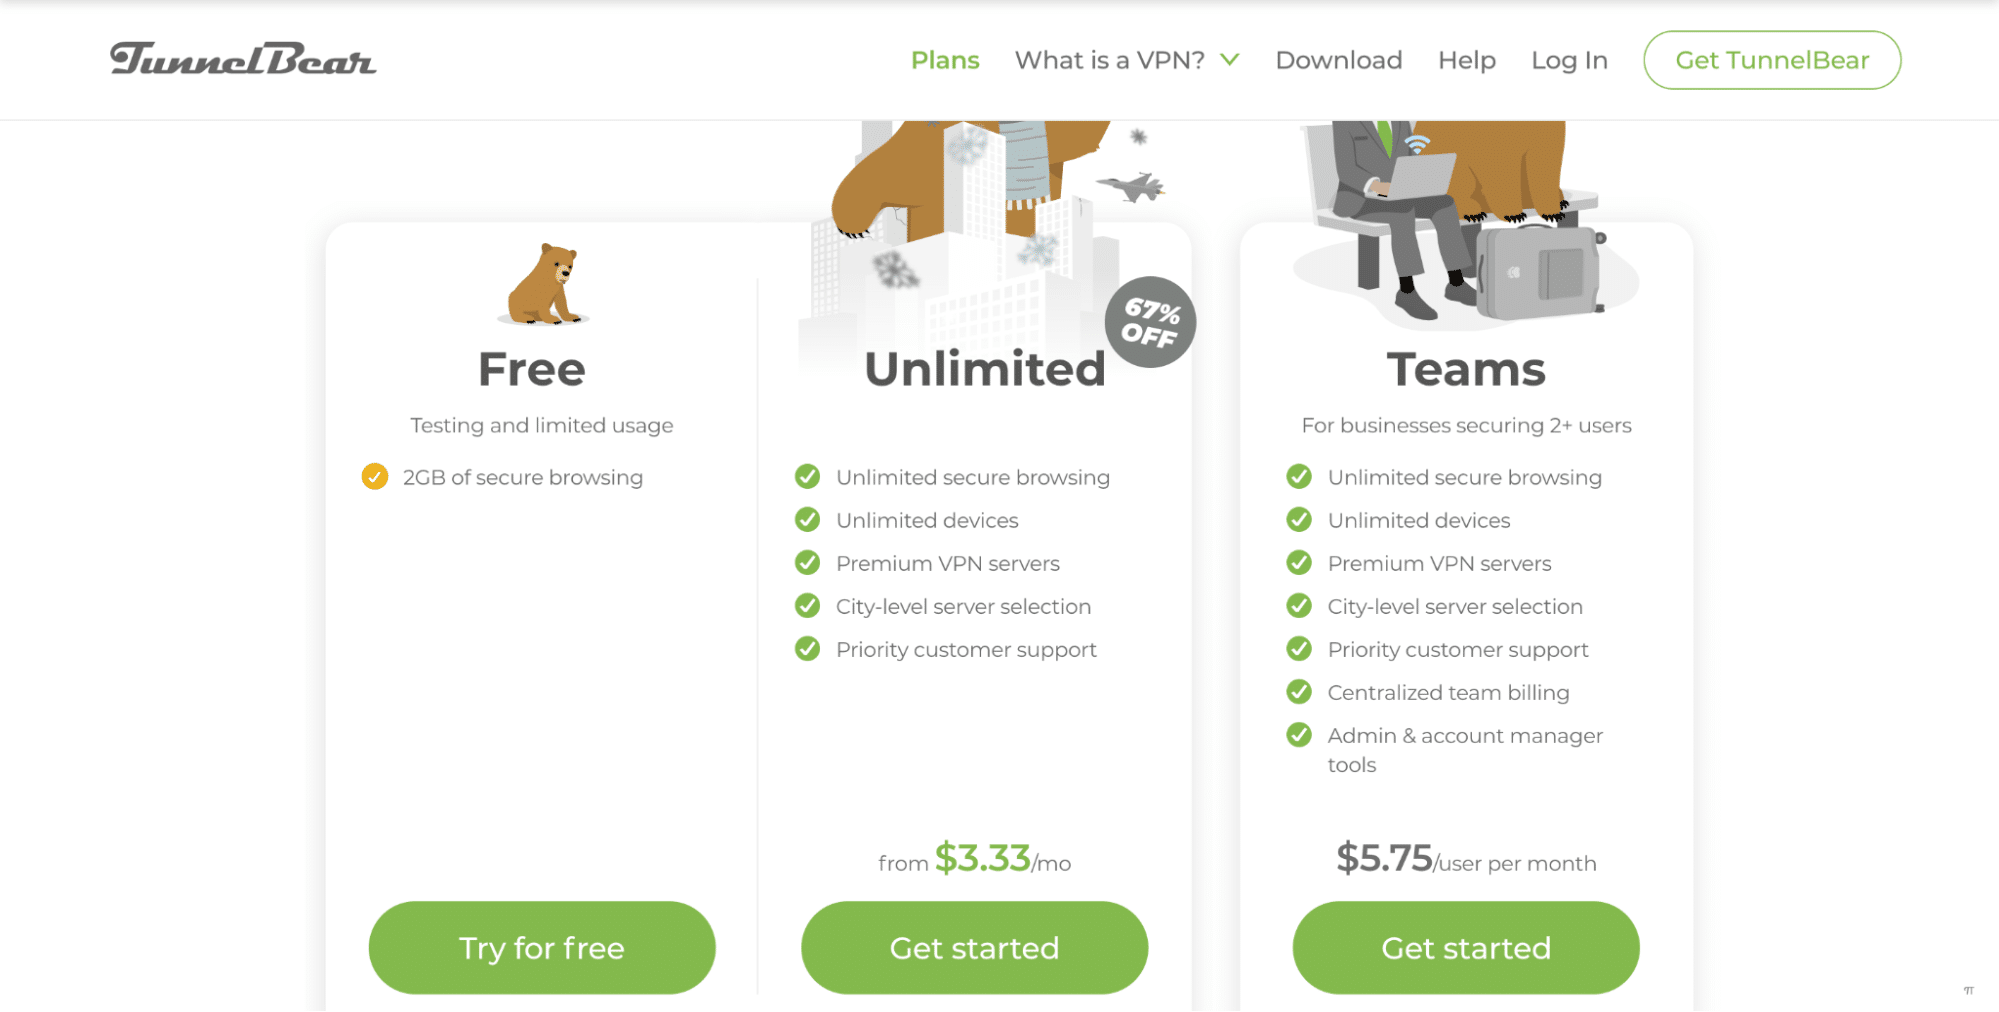 TunnelBear pricing and plans